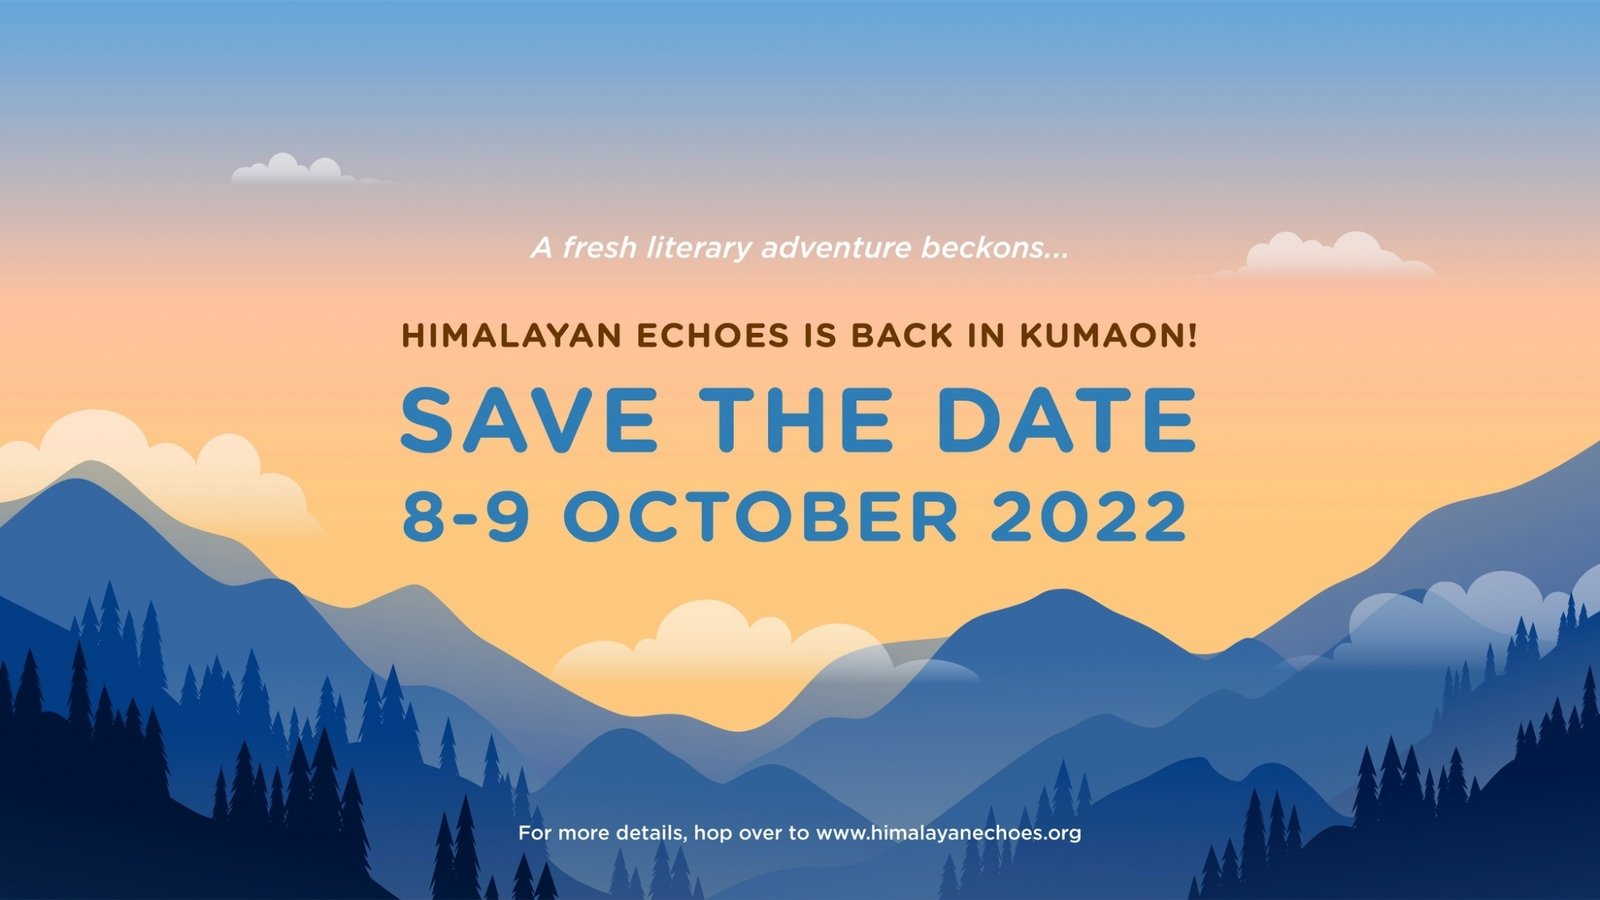 The Himalayan Echoes Literature Festival on October 8-9